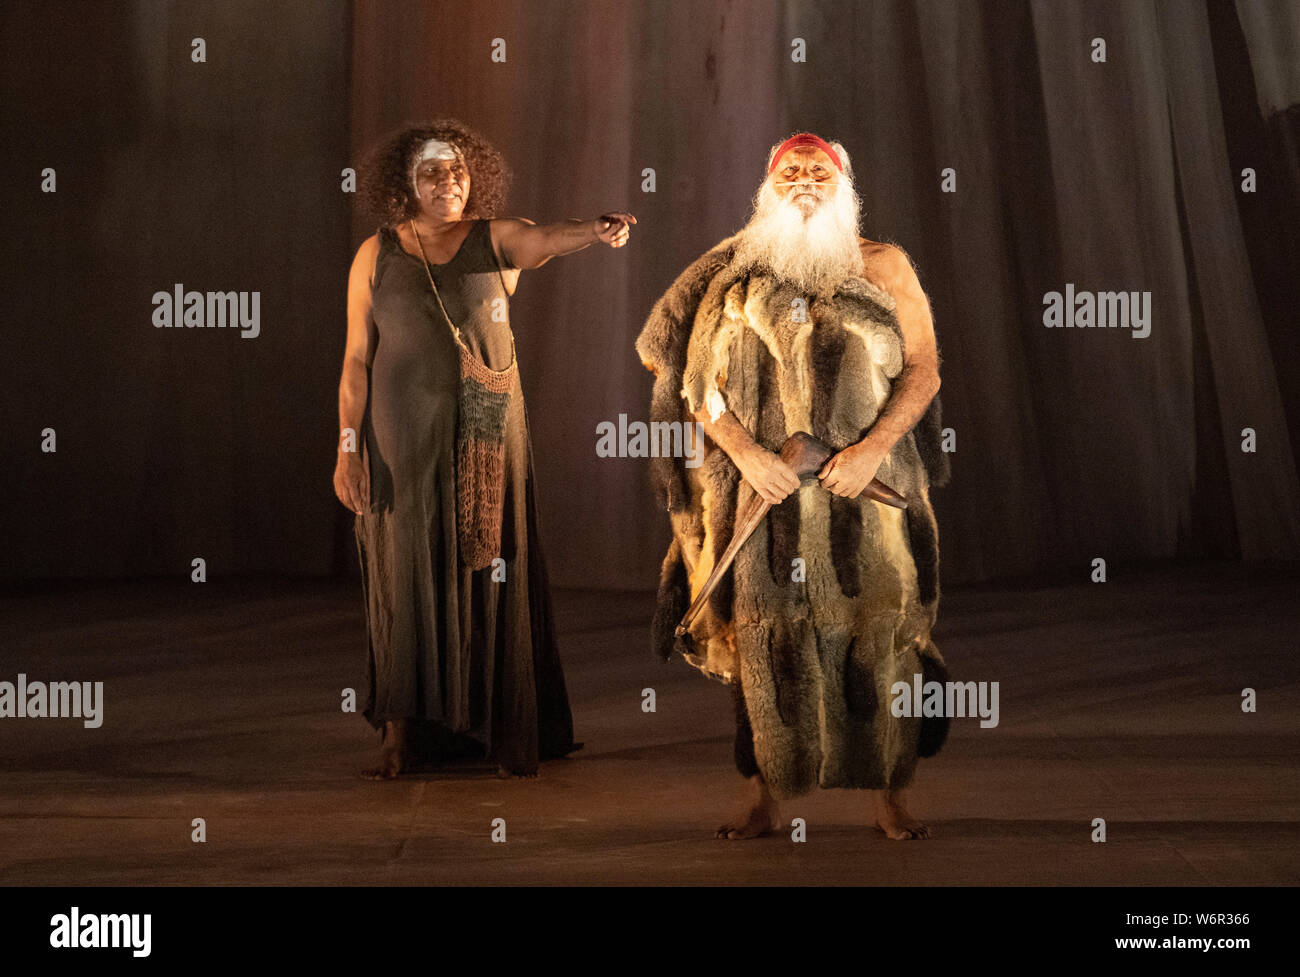 Edinburgh, Scotland, UK. 2nd Aug, 2019. Preview performance of extracts from the play The Secret River by Sydney Theatre Company at the King's Theatre . Adapted from the novel by Kate Grenville, this multi award winning stage drama charts the story of two families divided by culture and land. Credit: Iain Masterton/Alamy Live News Stock Photo